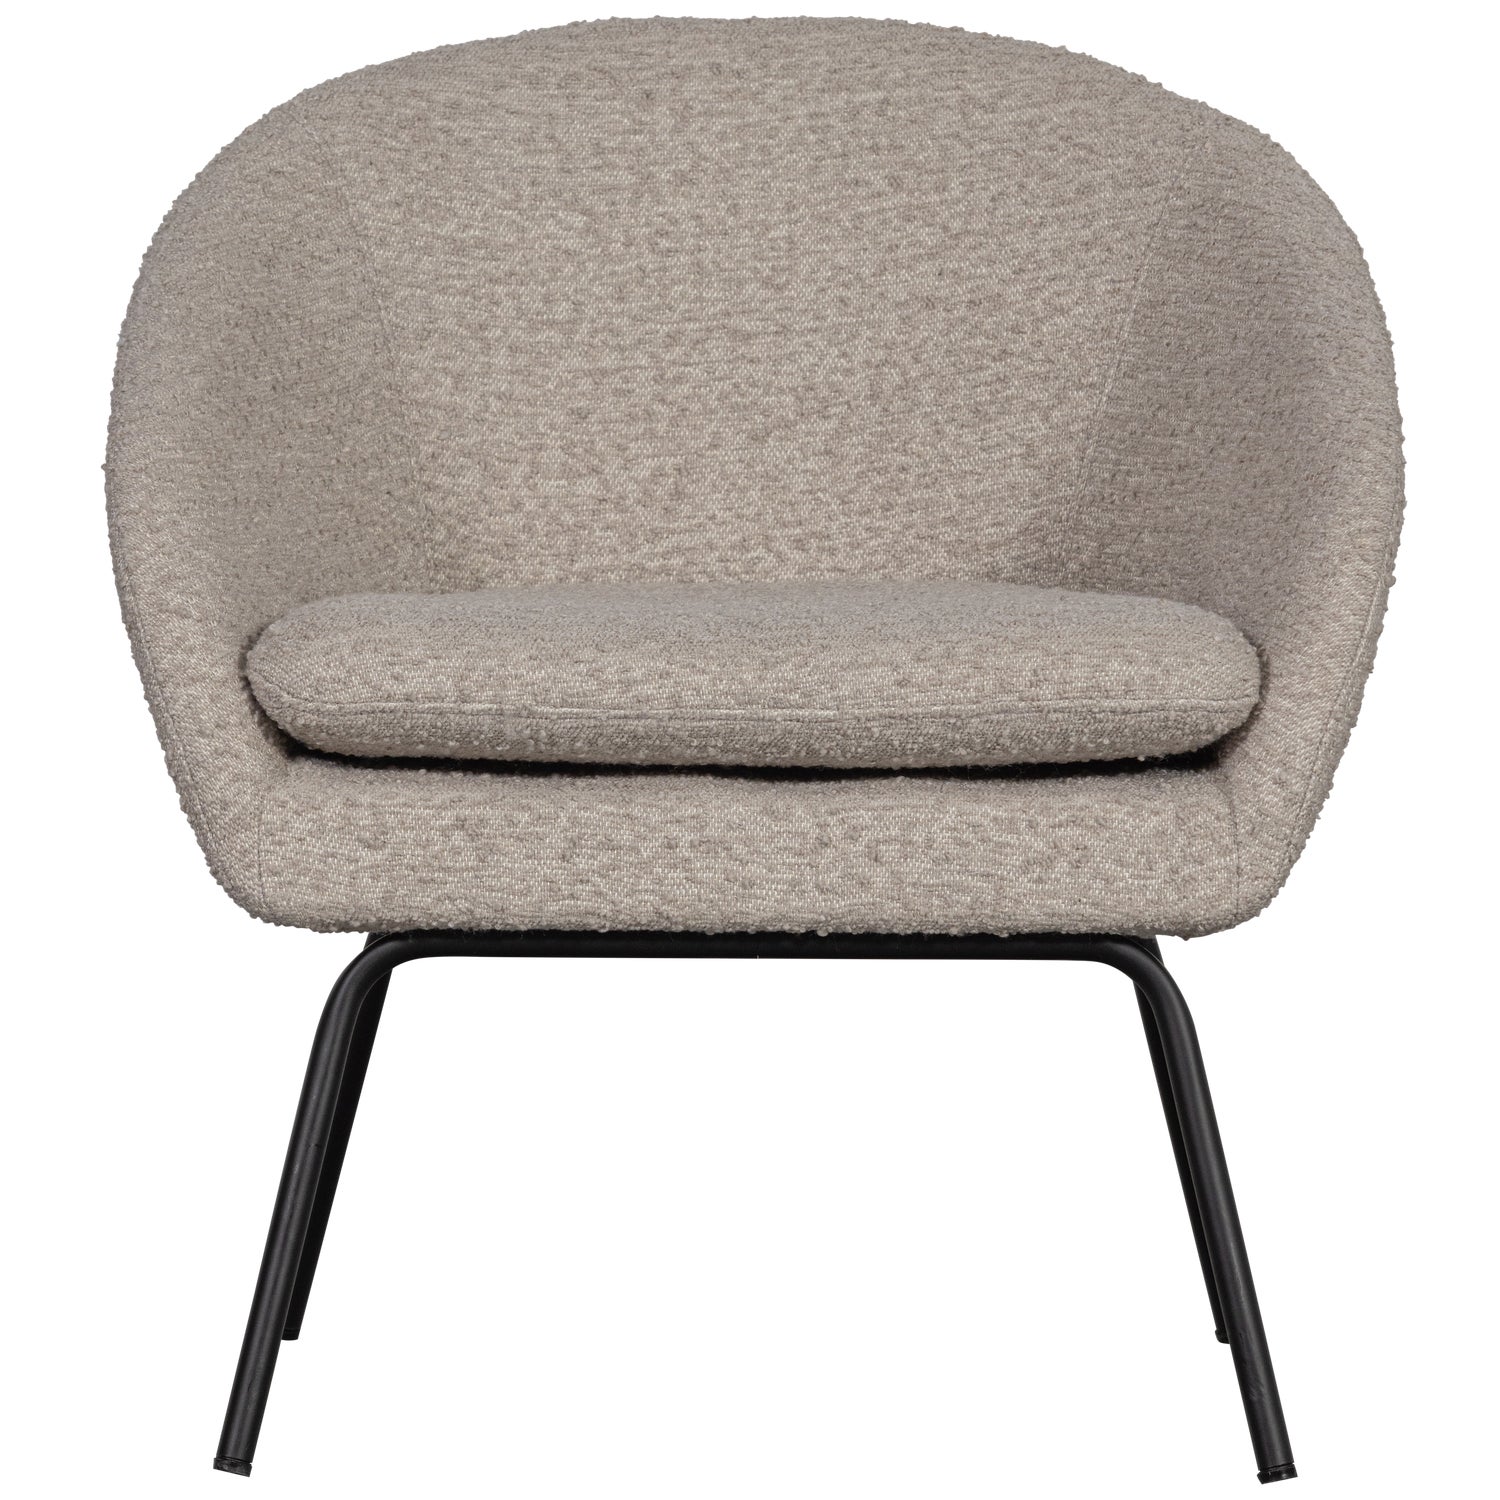 375919-G-01_VS_KW_Ditte_fauteuil_boucle_greige.png?auto=webp&format=png&width=1500&height=1500